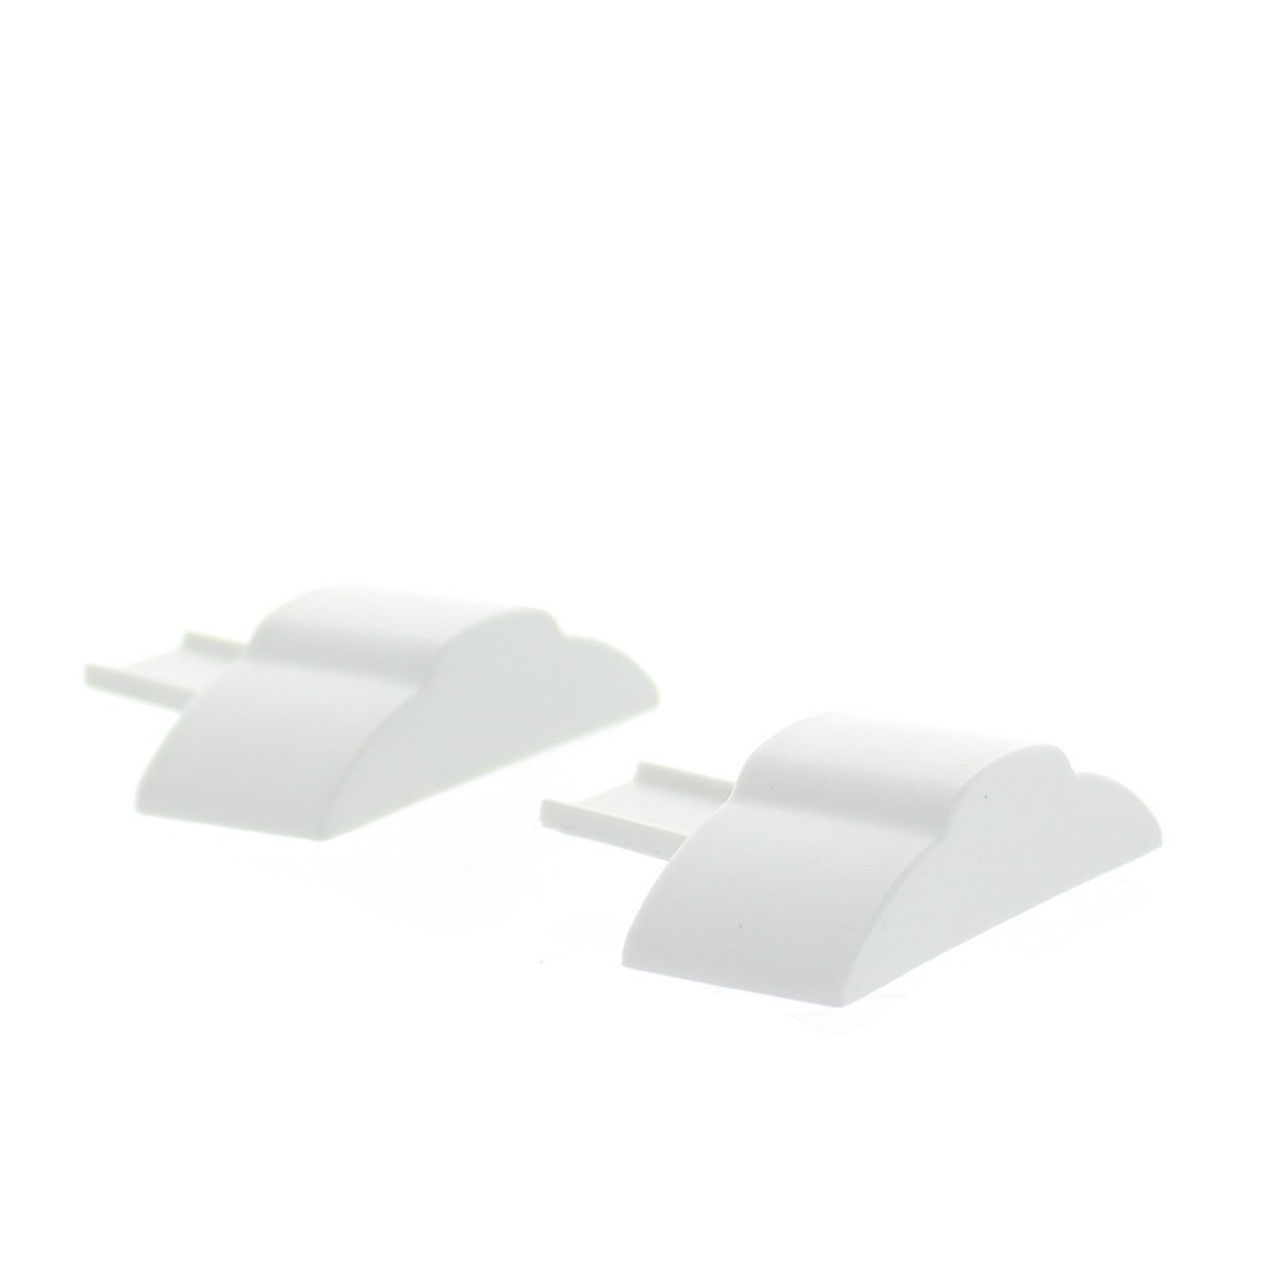 Jr Products New RV Camper Polar White Full Extrusion End Cap, 49635, 00180915